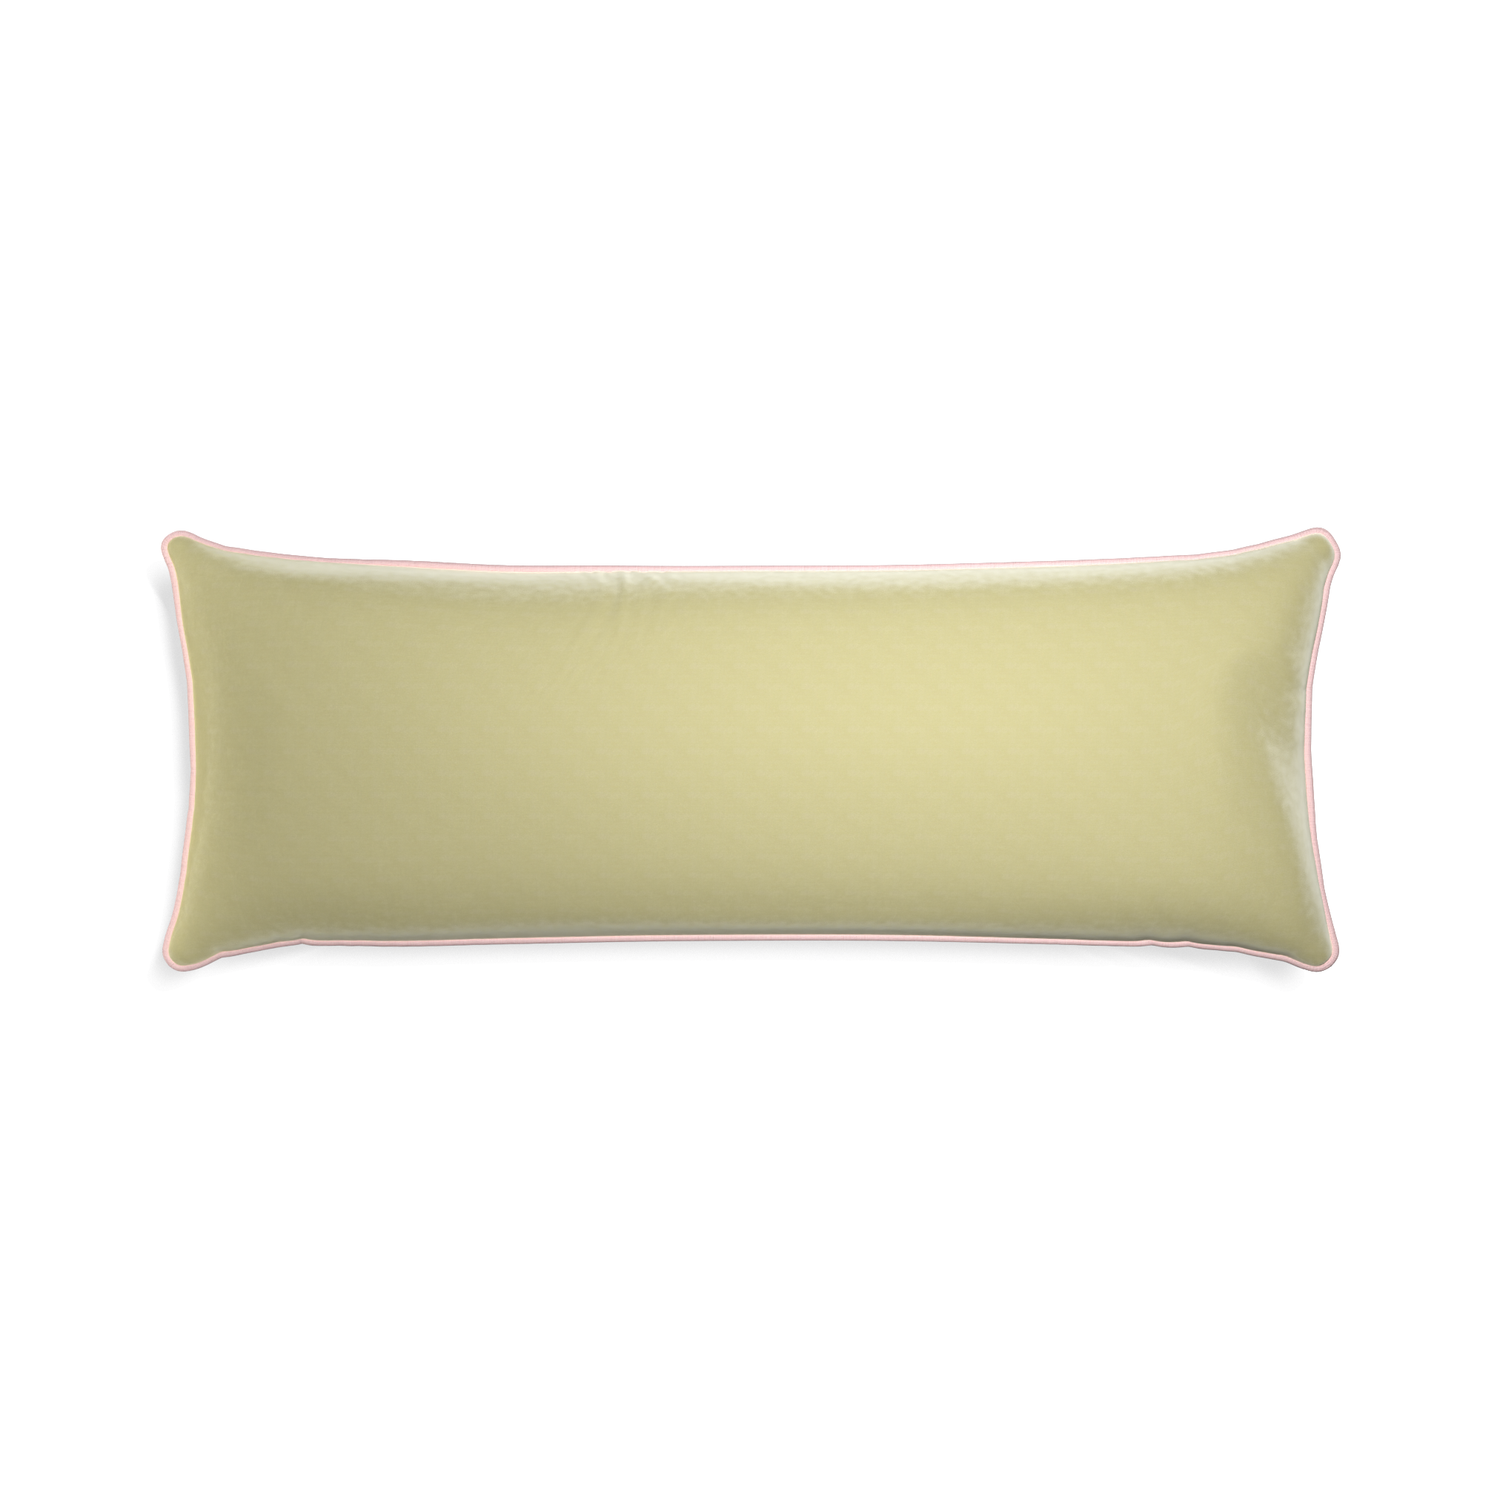 Xl-lumbar pear velvet custom pillow with petal piping on white background